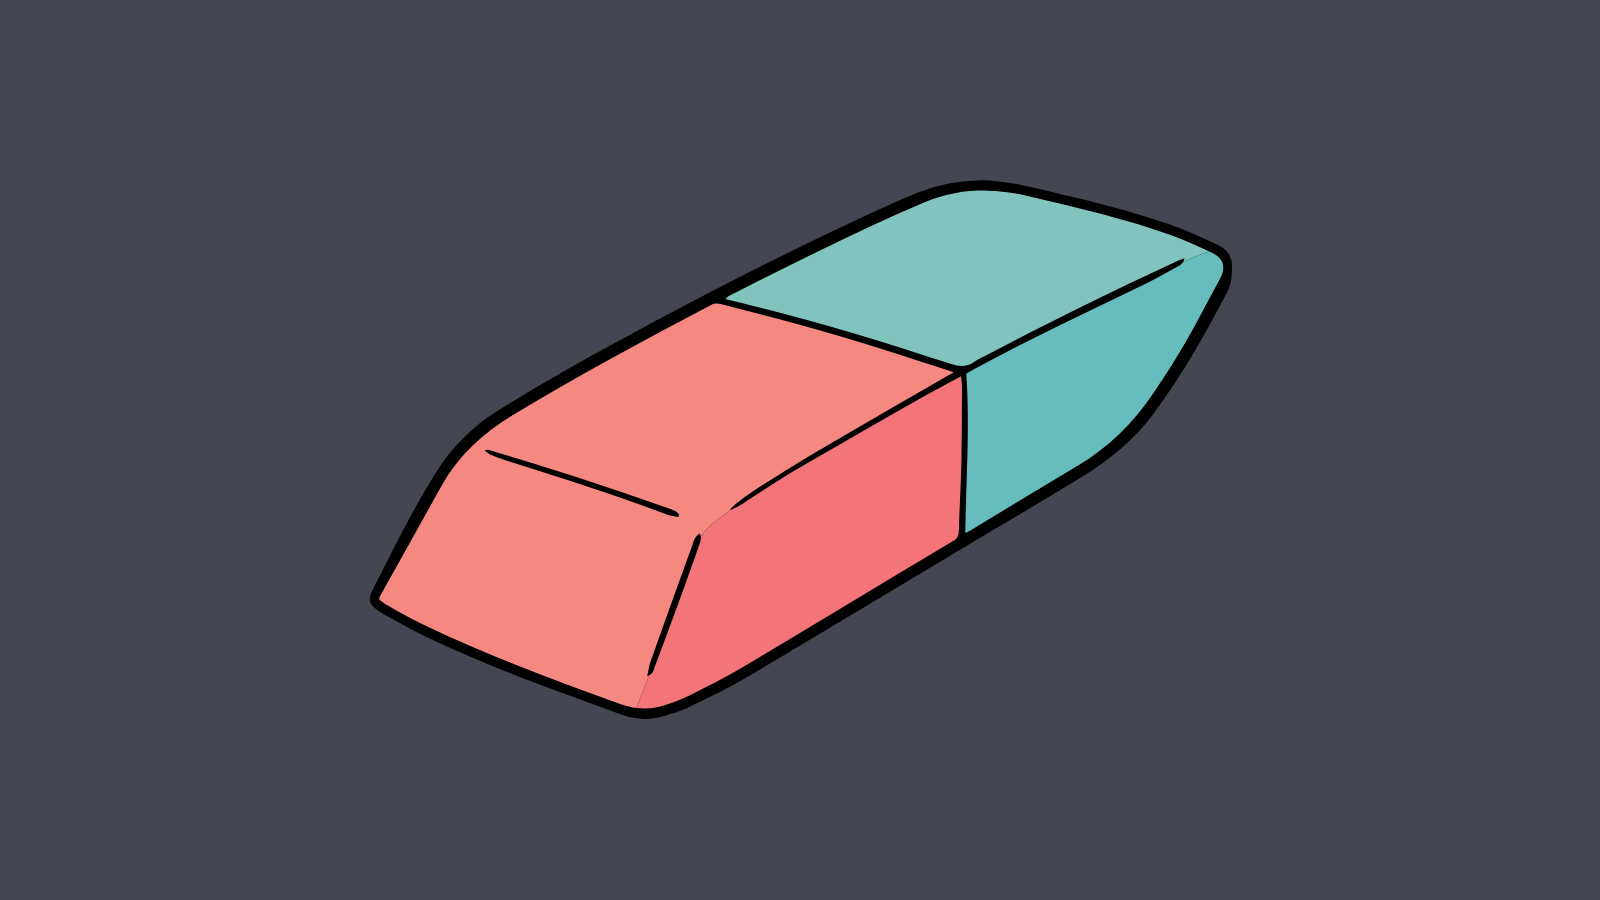 An old-school pink and blue eraser